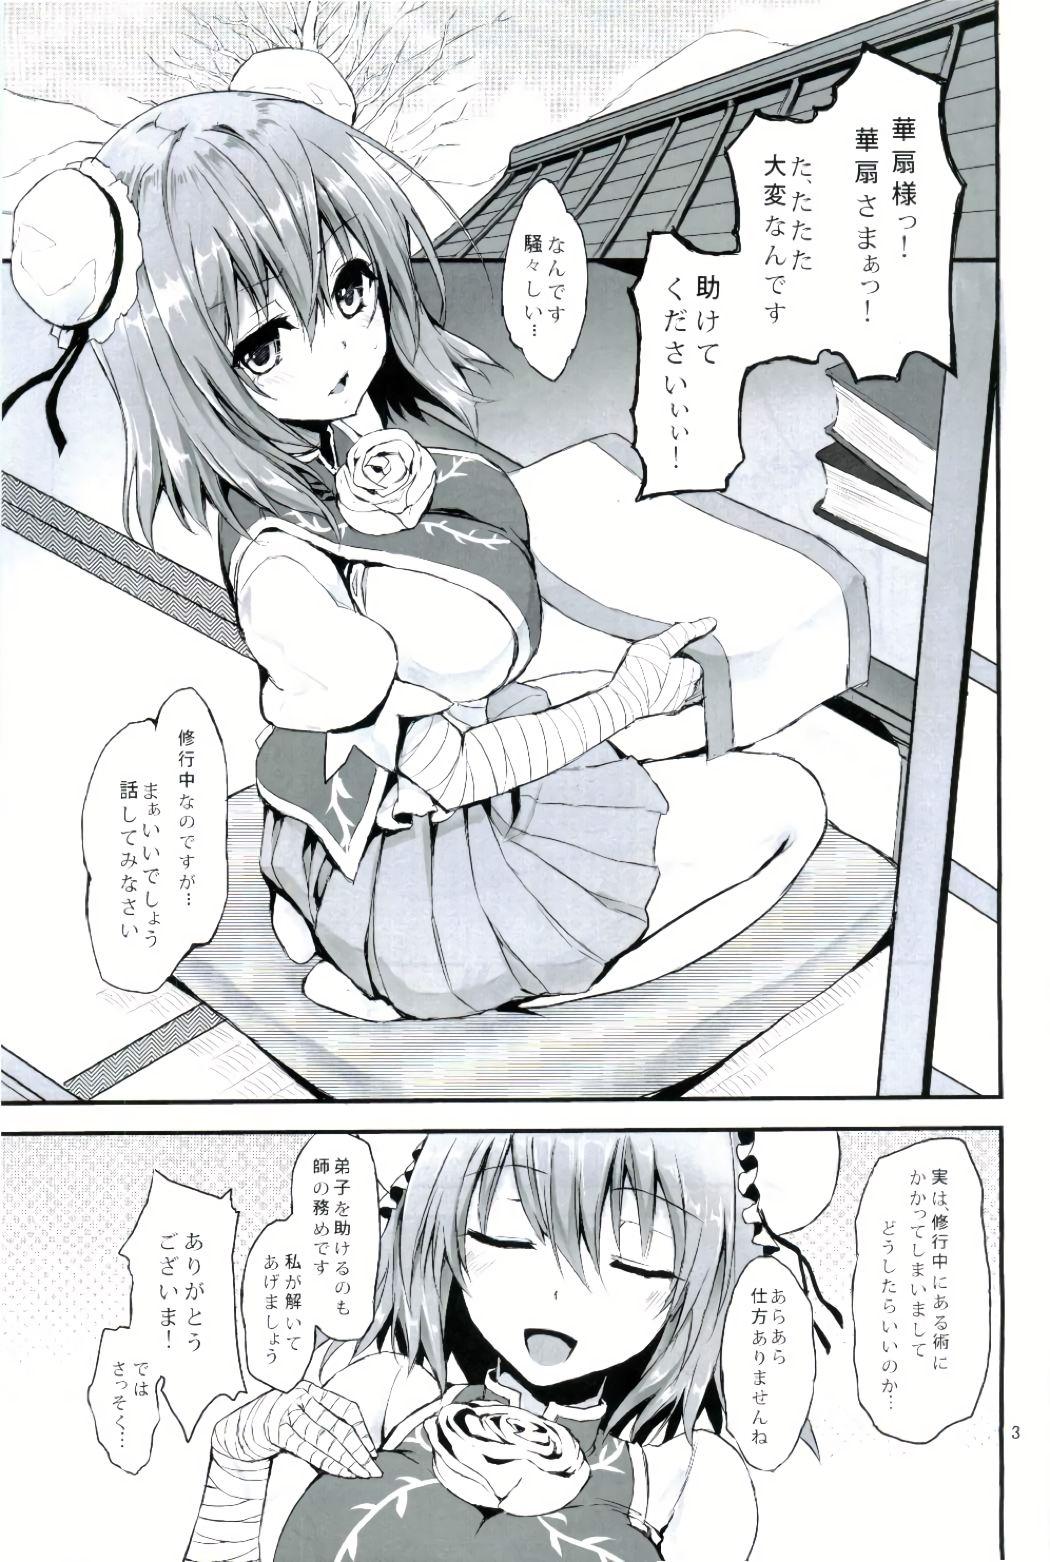 Double Penetration ANMITSU TOUHOU HISTORY - Touhou project Daring - Page 3